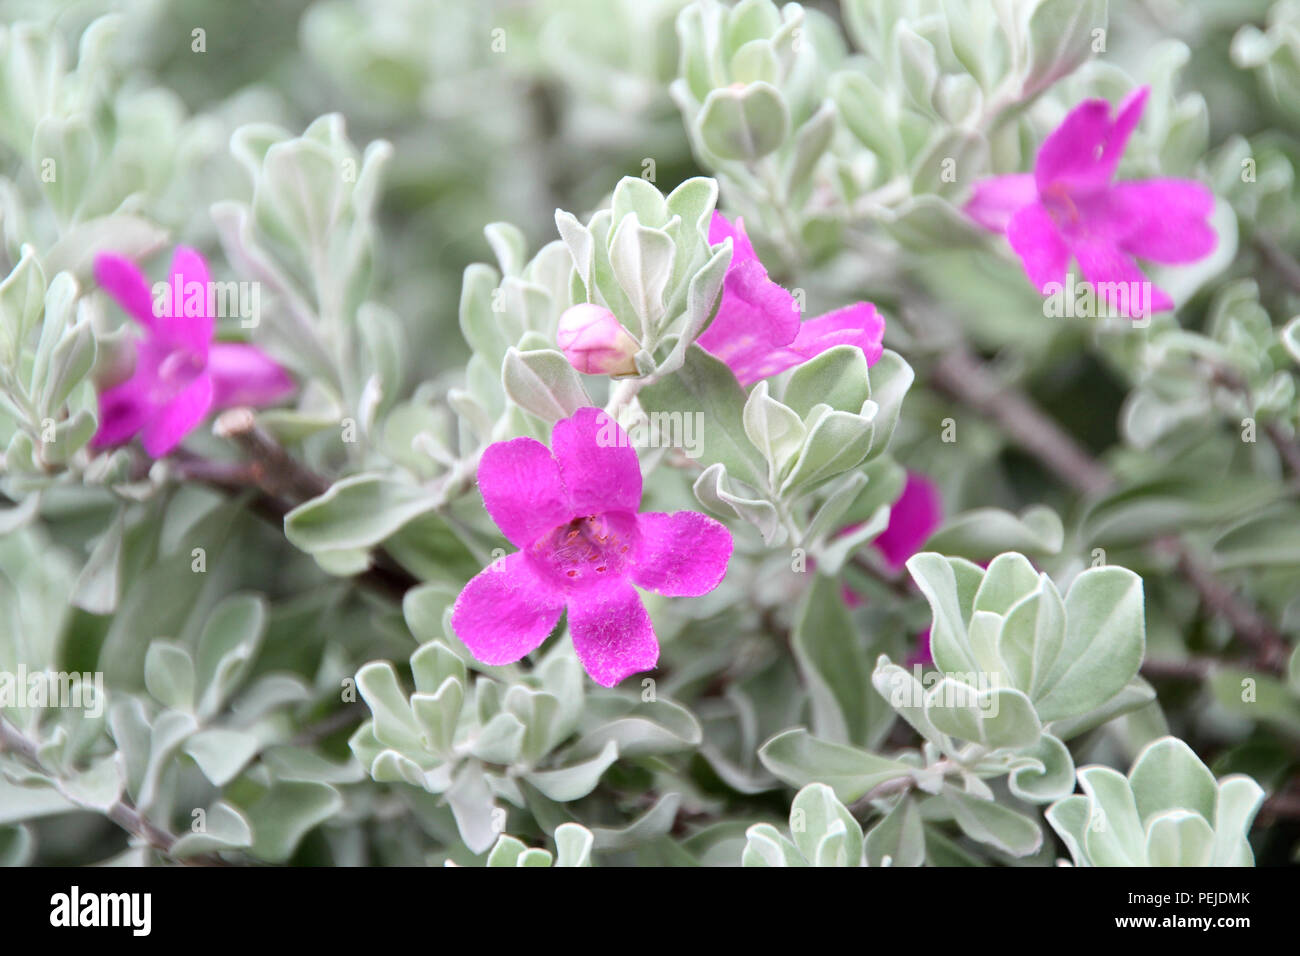 Texas Sage, Texas silver leaf, grey leaves with purple flowers, perfect natural color splash done by the nature, garden flowers in Singapore Stock Photo